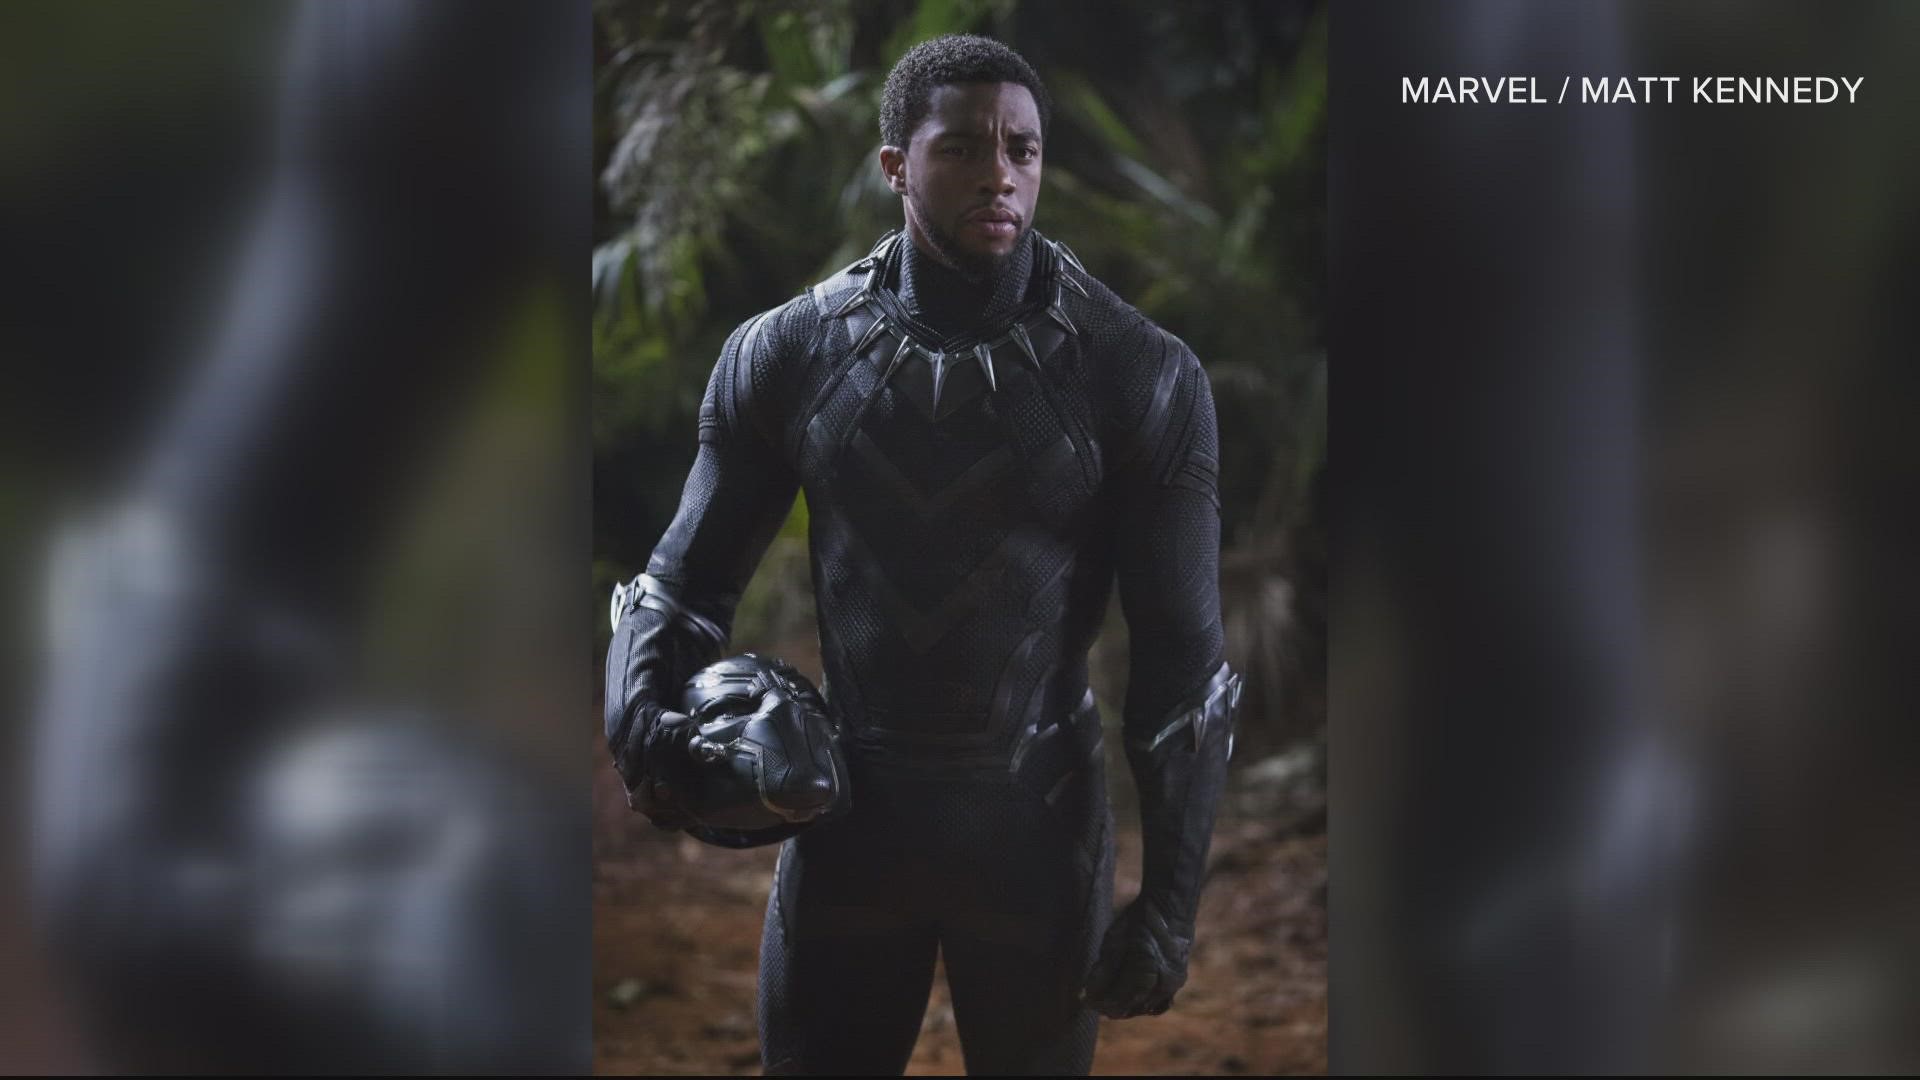 The late Chadwick Boseman's Black Panther suit will go on display next year at the National Museum of African American History and Culture.